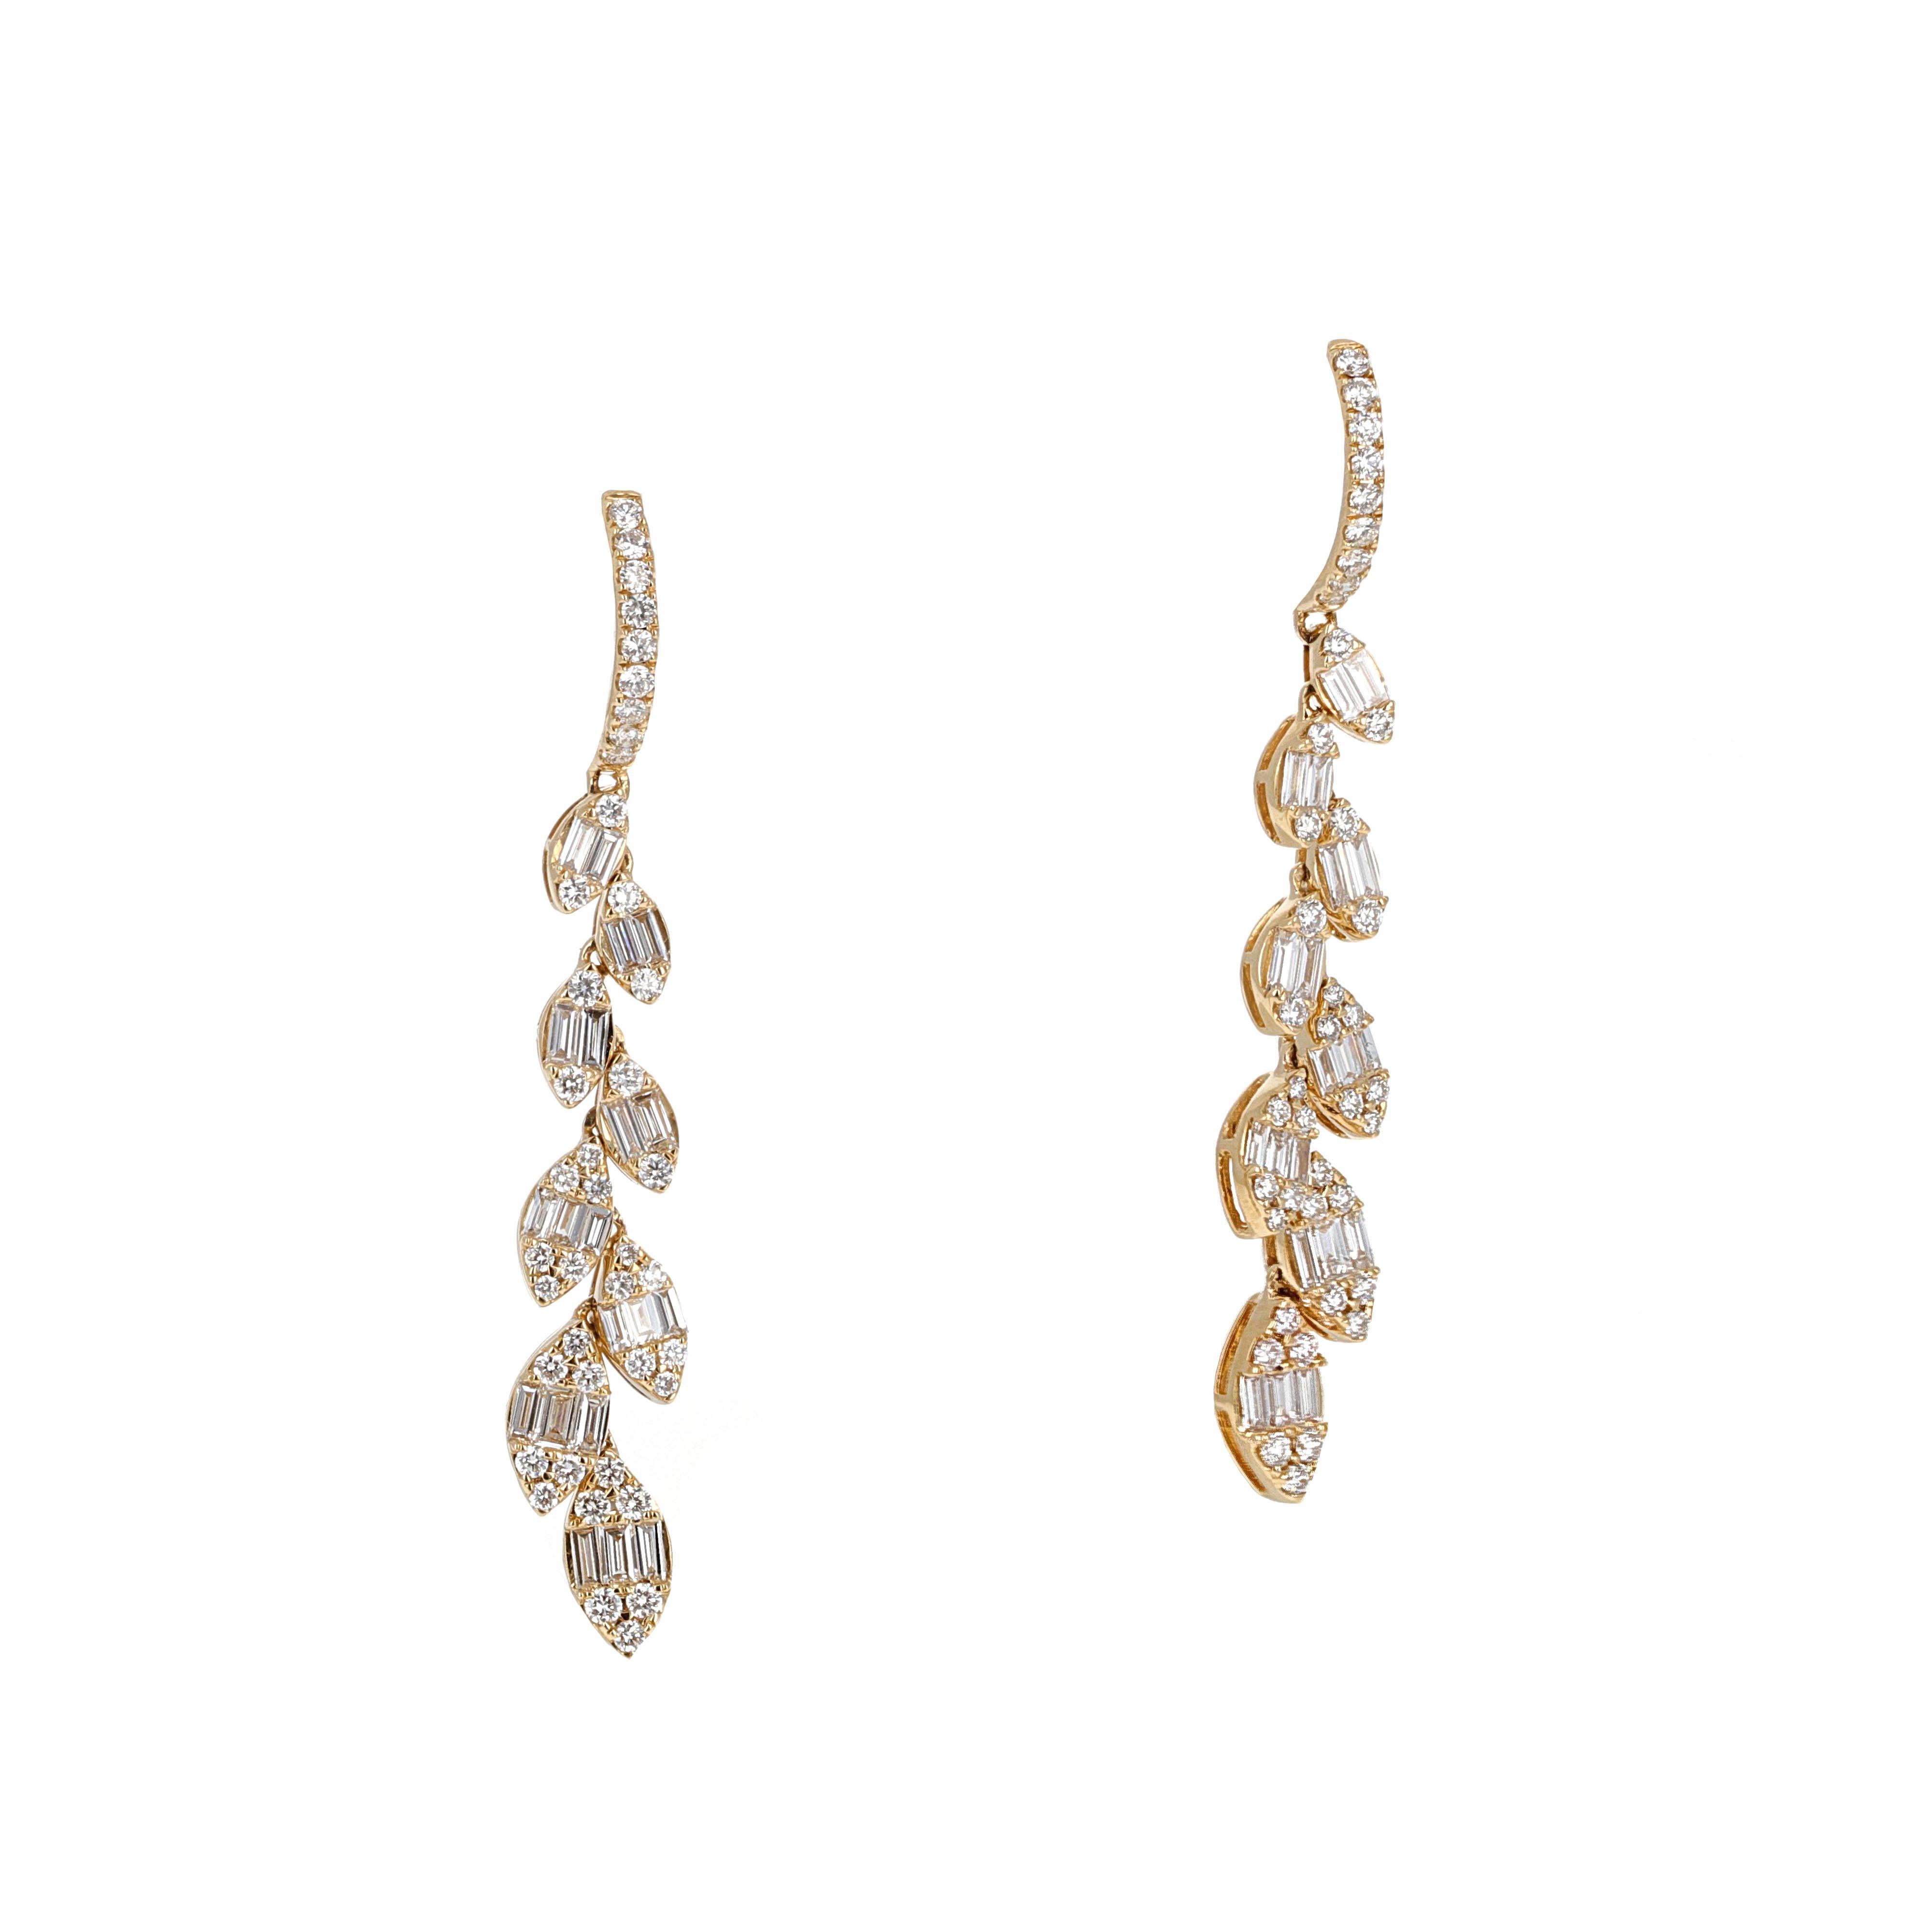 18 karat yellow gold diamond illusion dangle earrings. The stones in the earrings are made to look like marquise shaped diamonds. When you look at each marguise close up you will notice they are made up on round and baguette shaped diamonds. This is